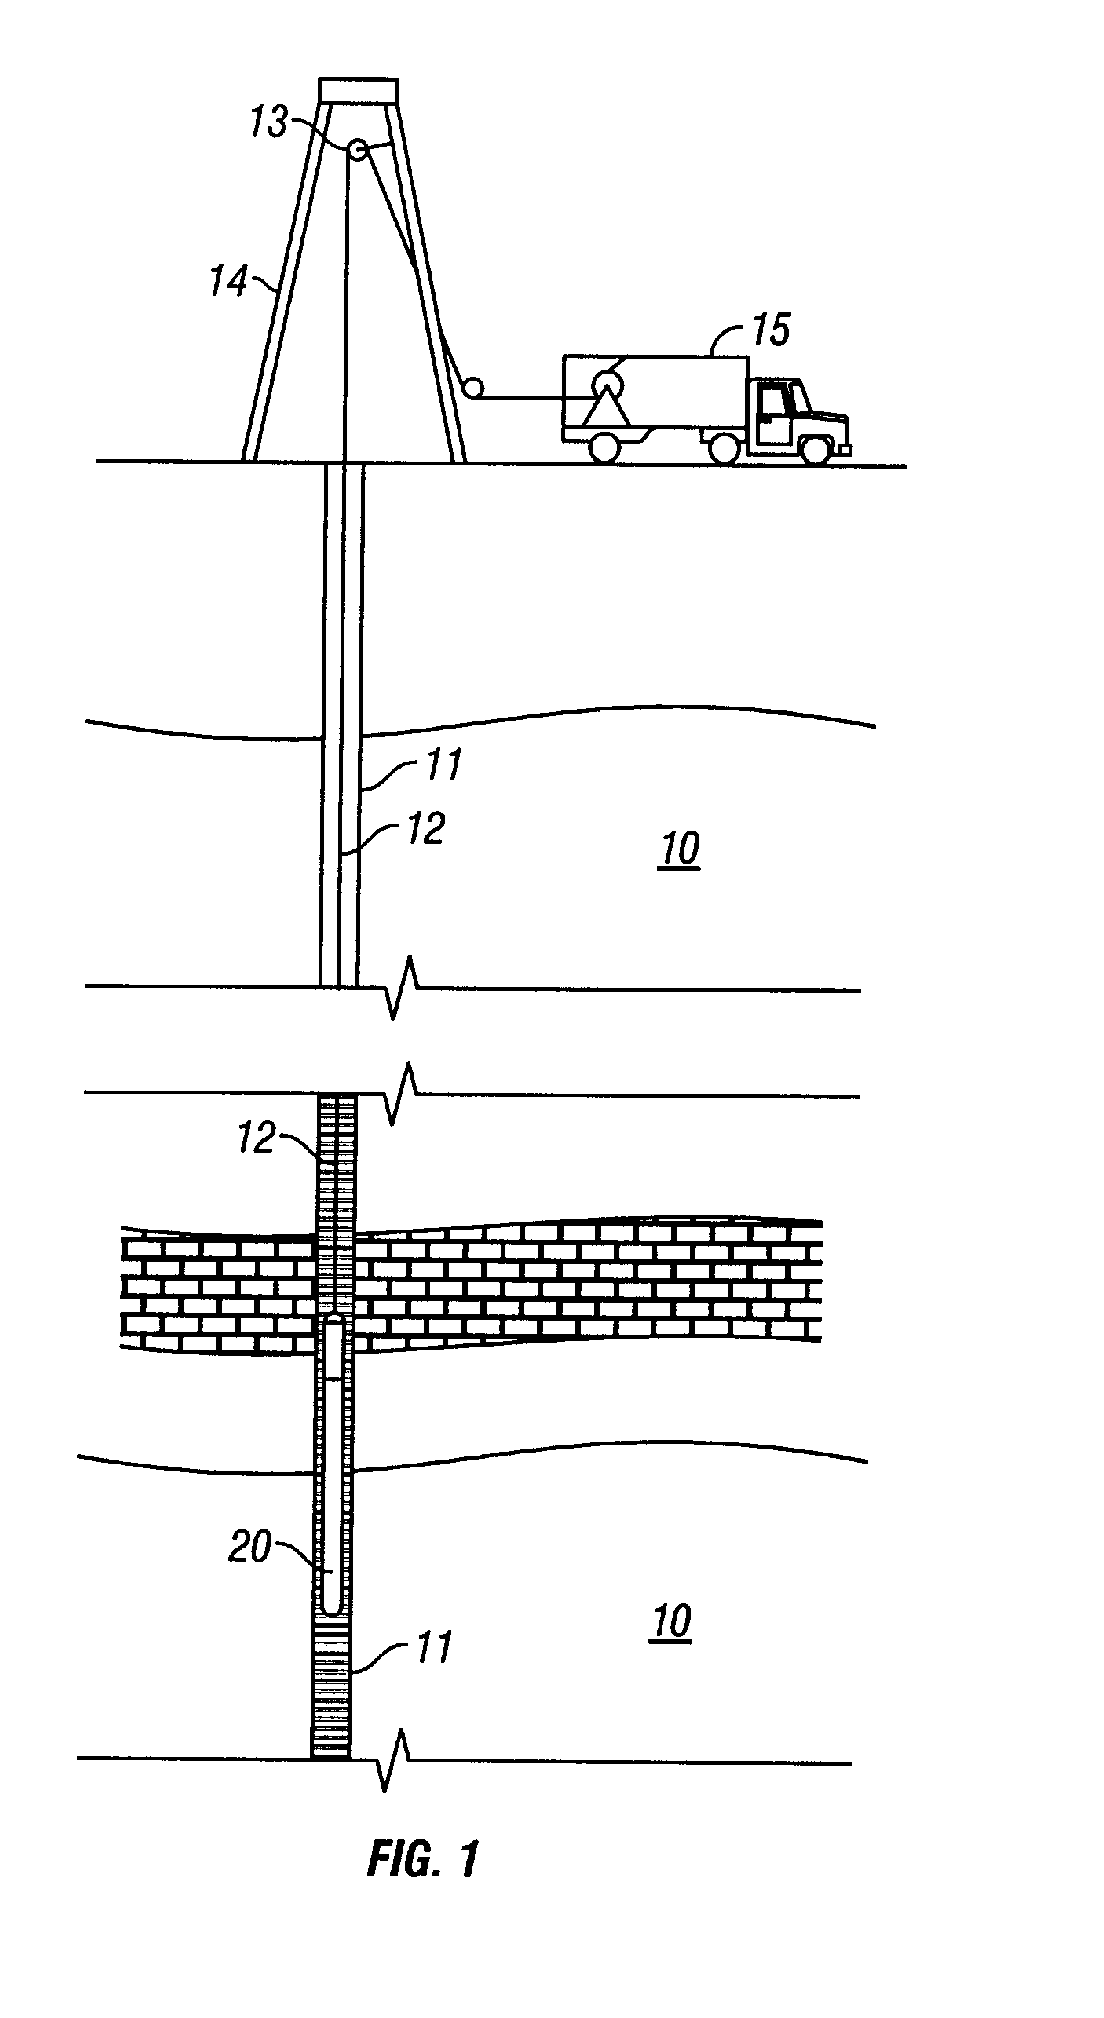 Method and apparatus for an optimal pumping rate based on a downhole dew point pressure determination